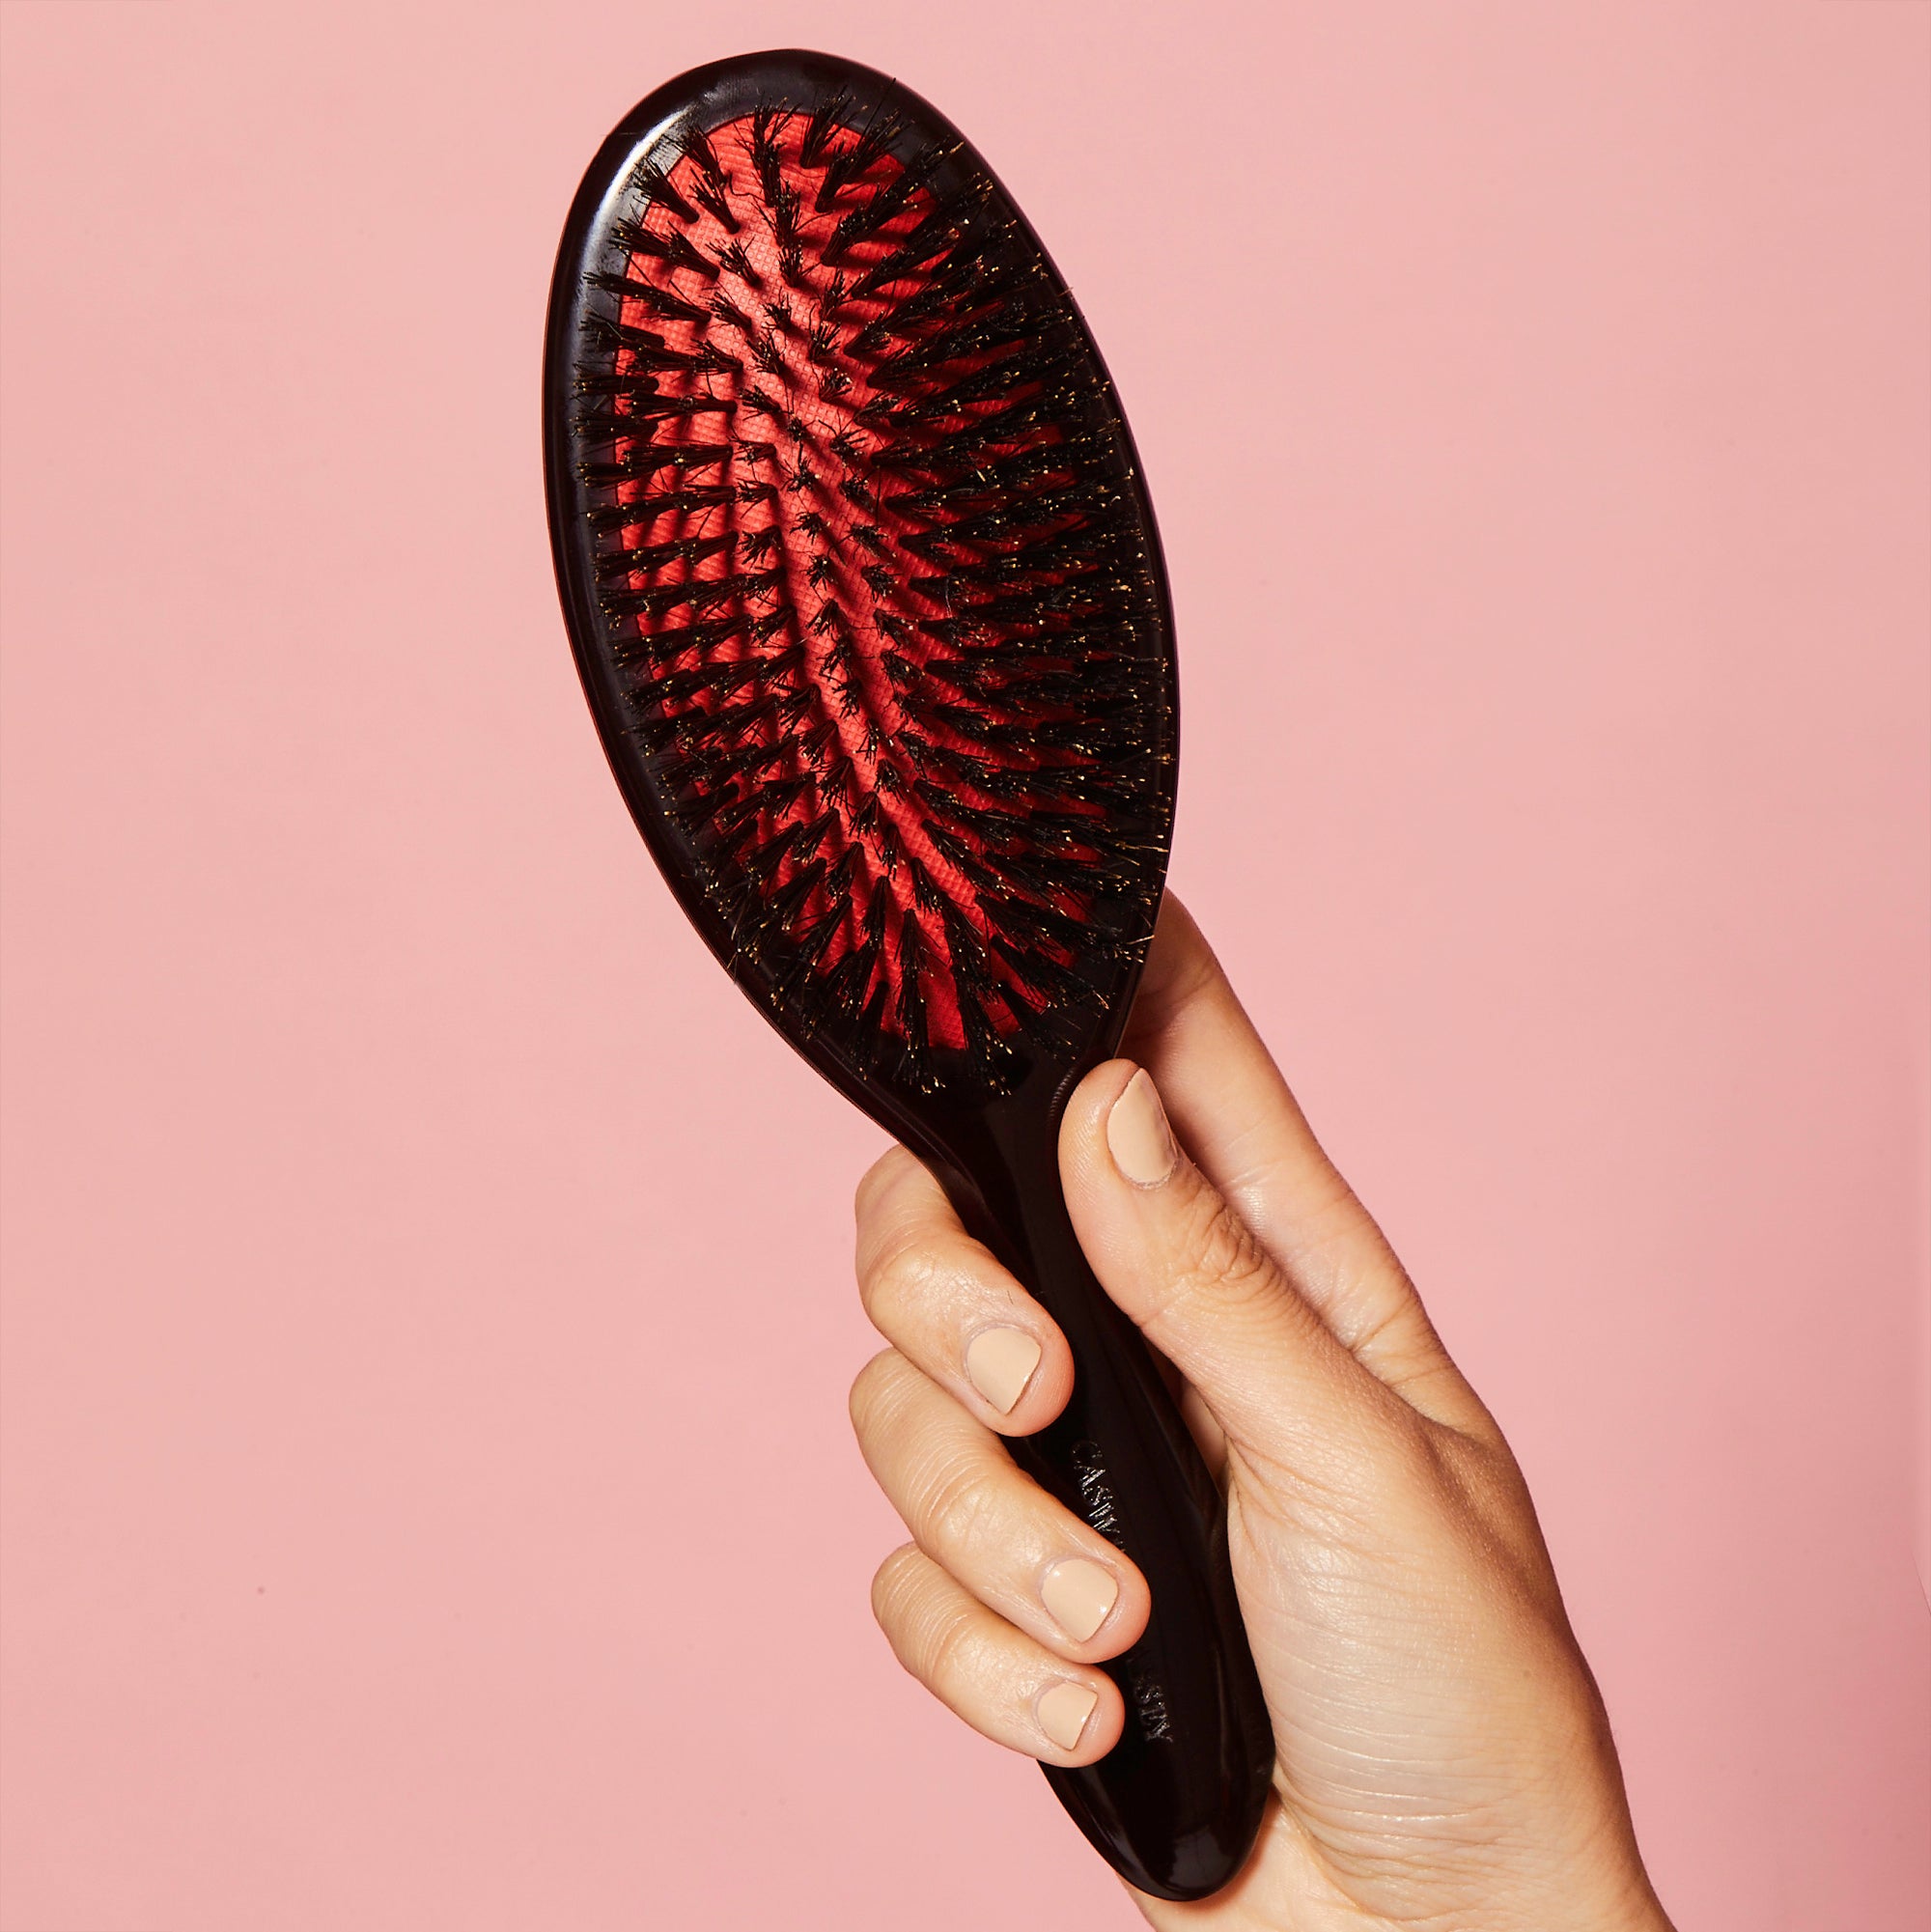 Caswell-Massey Standard Boar Bristle Hair Brush being held by woman's hand